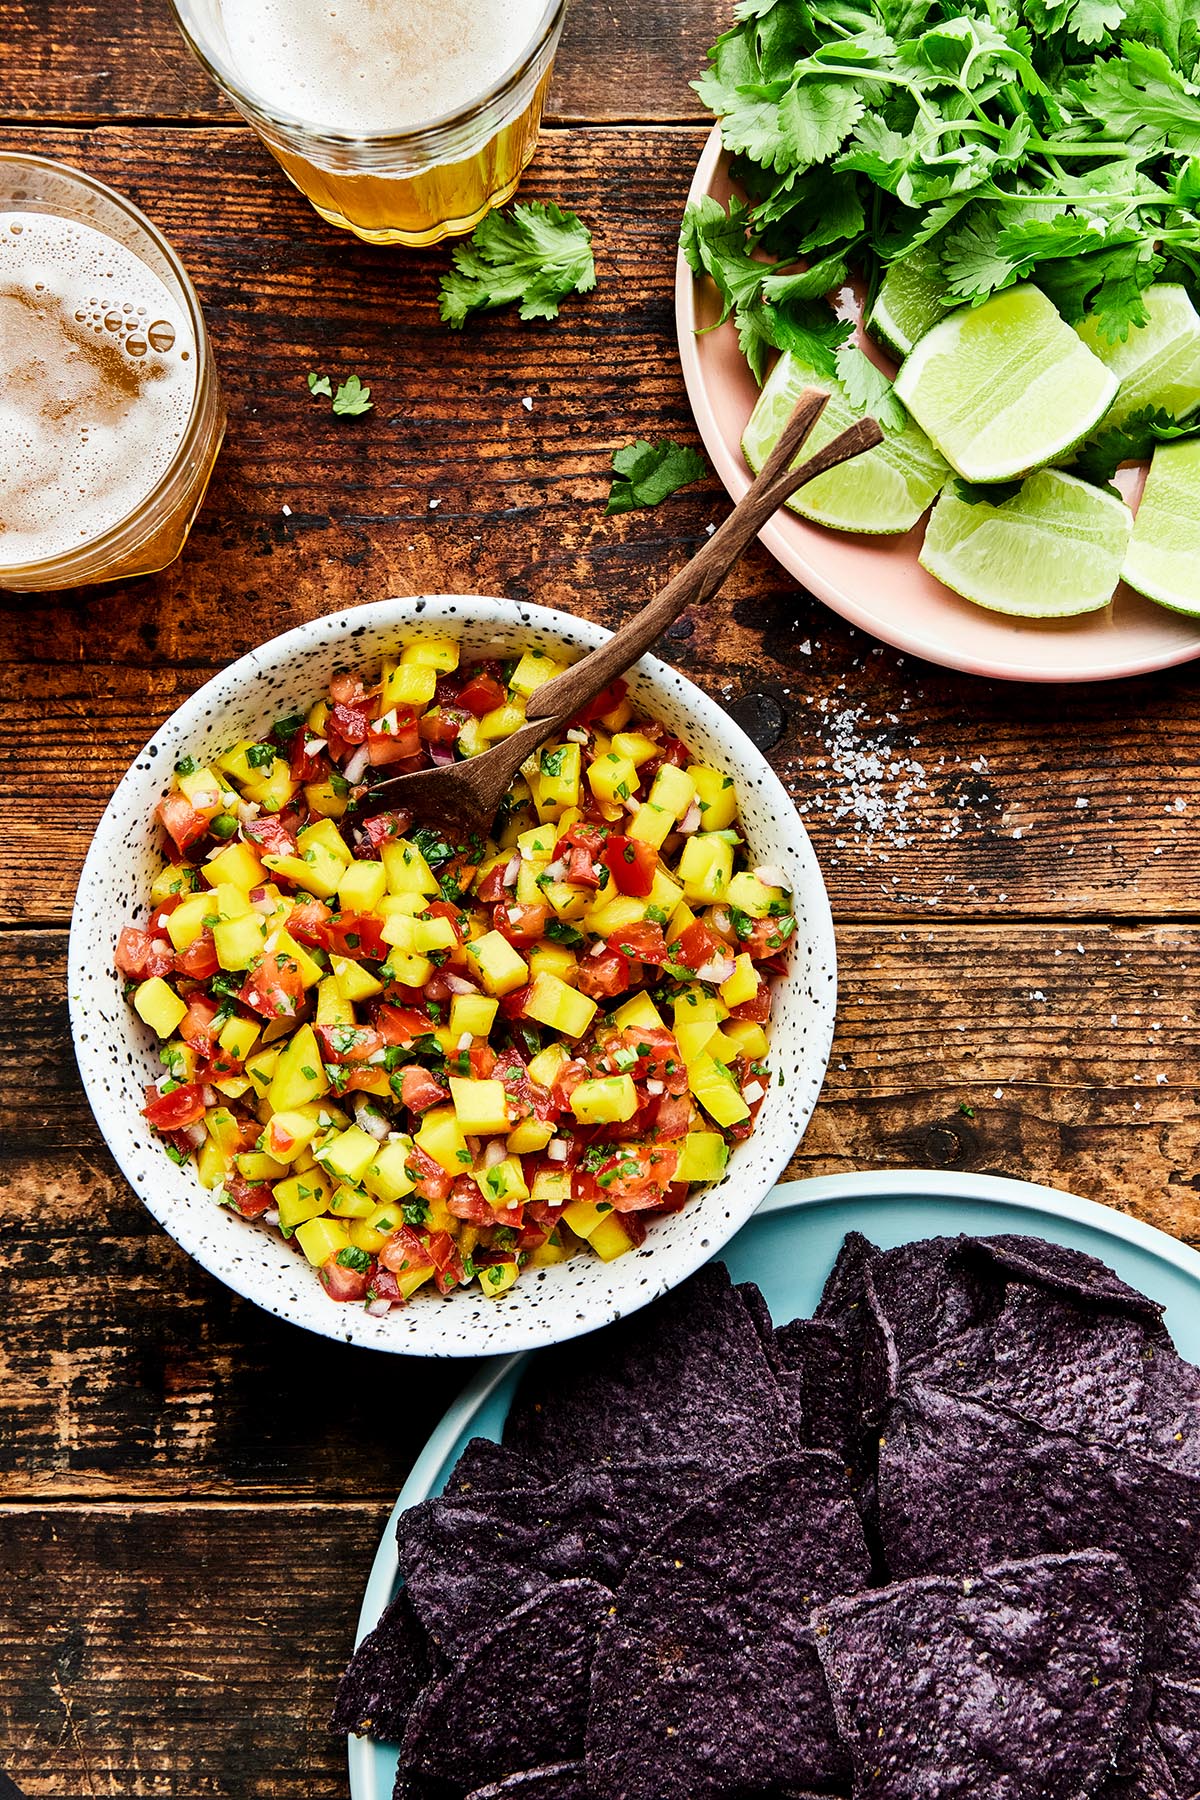 A bowl of mango pico de gallo on a wooden table alongside a blue plate with blue corn chips, a pink plate with fresh cilantro and limes, and two glasses of beer.